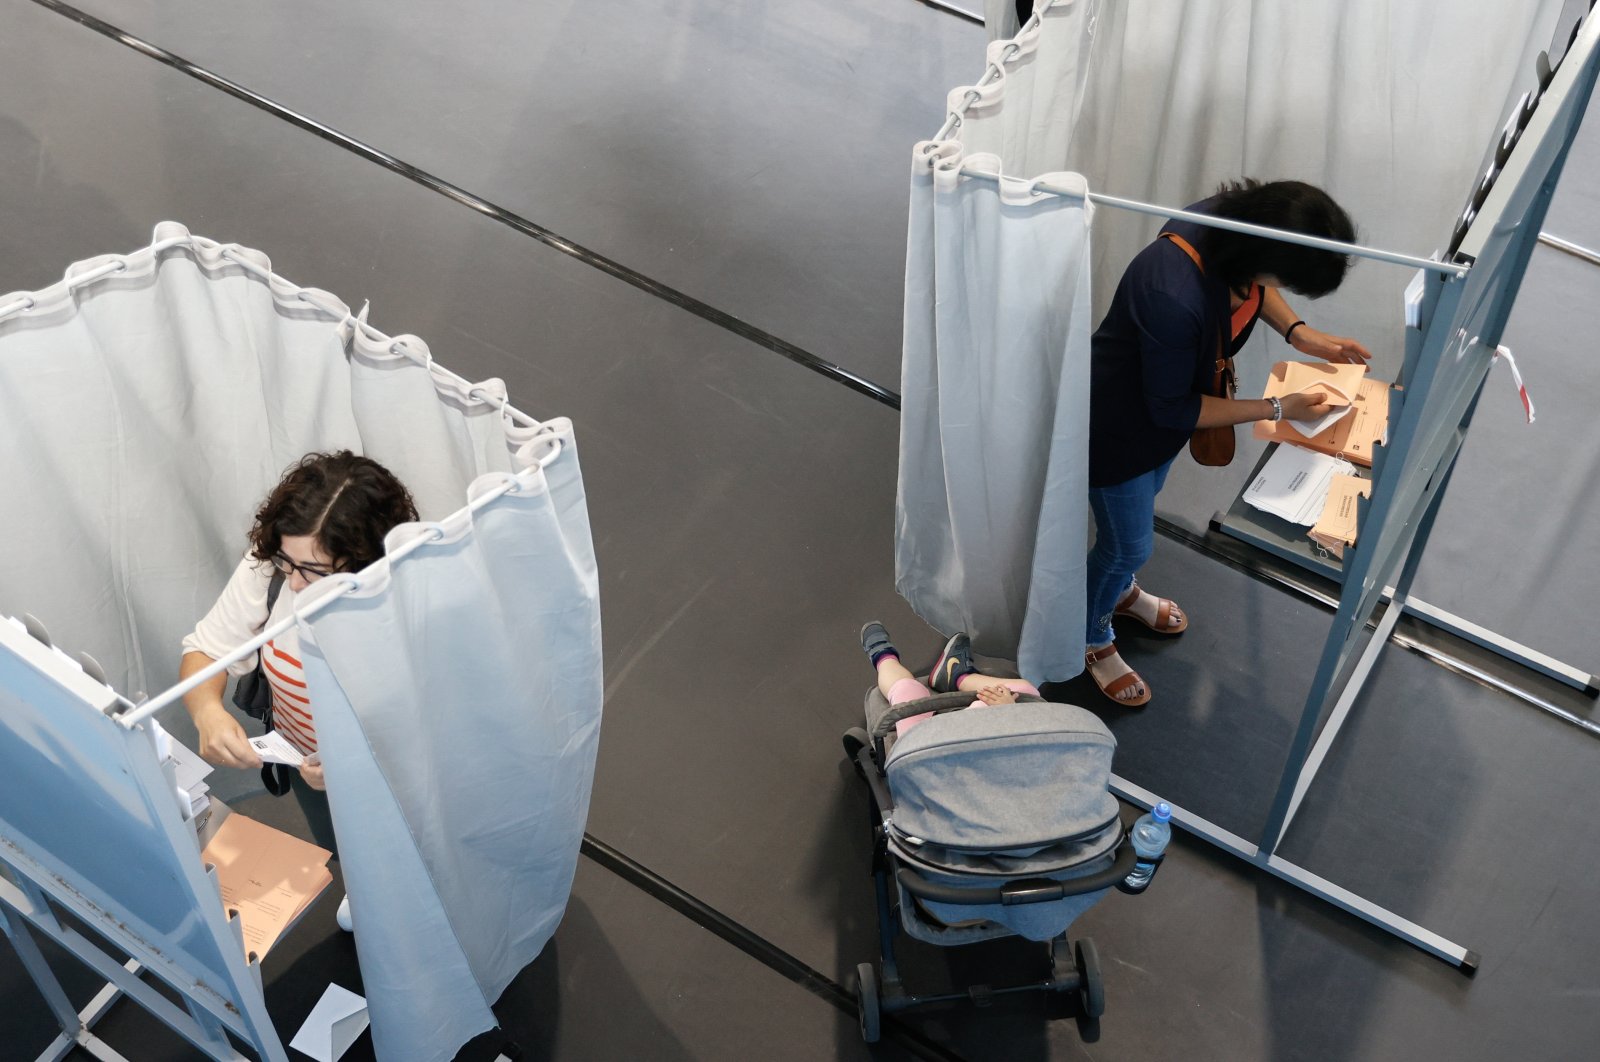 Voters mark their ballots inside polling booths at a polling station during the general election in Santiago de Compostela, Spain, July 23, 2023. (EPA photo)